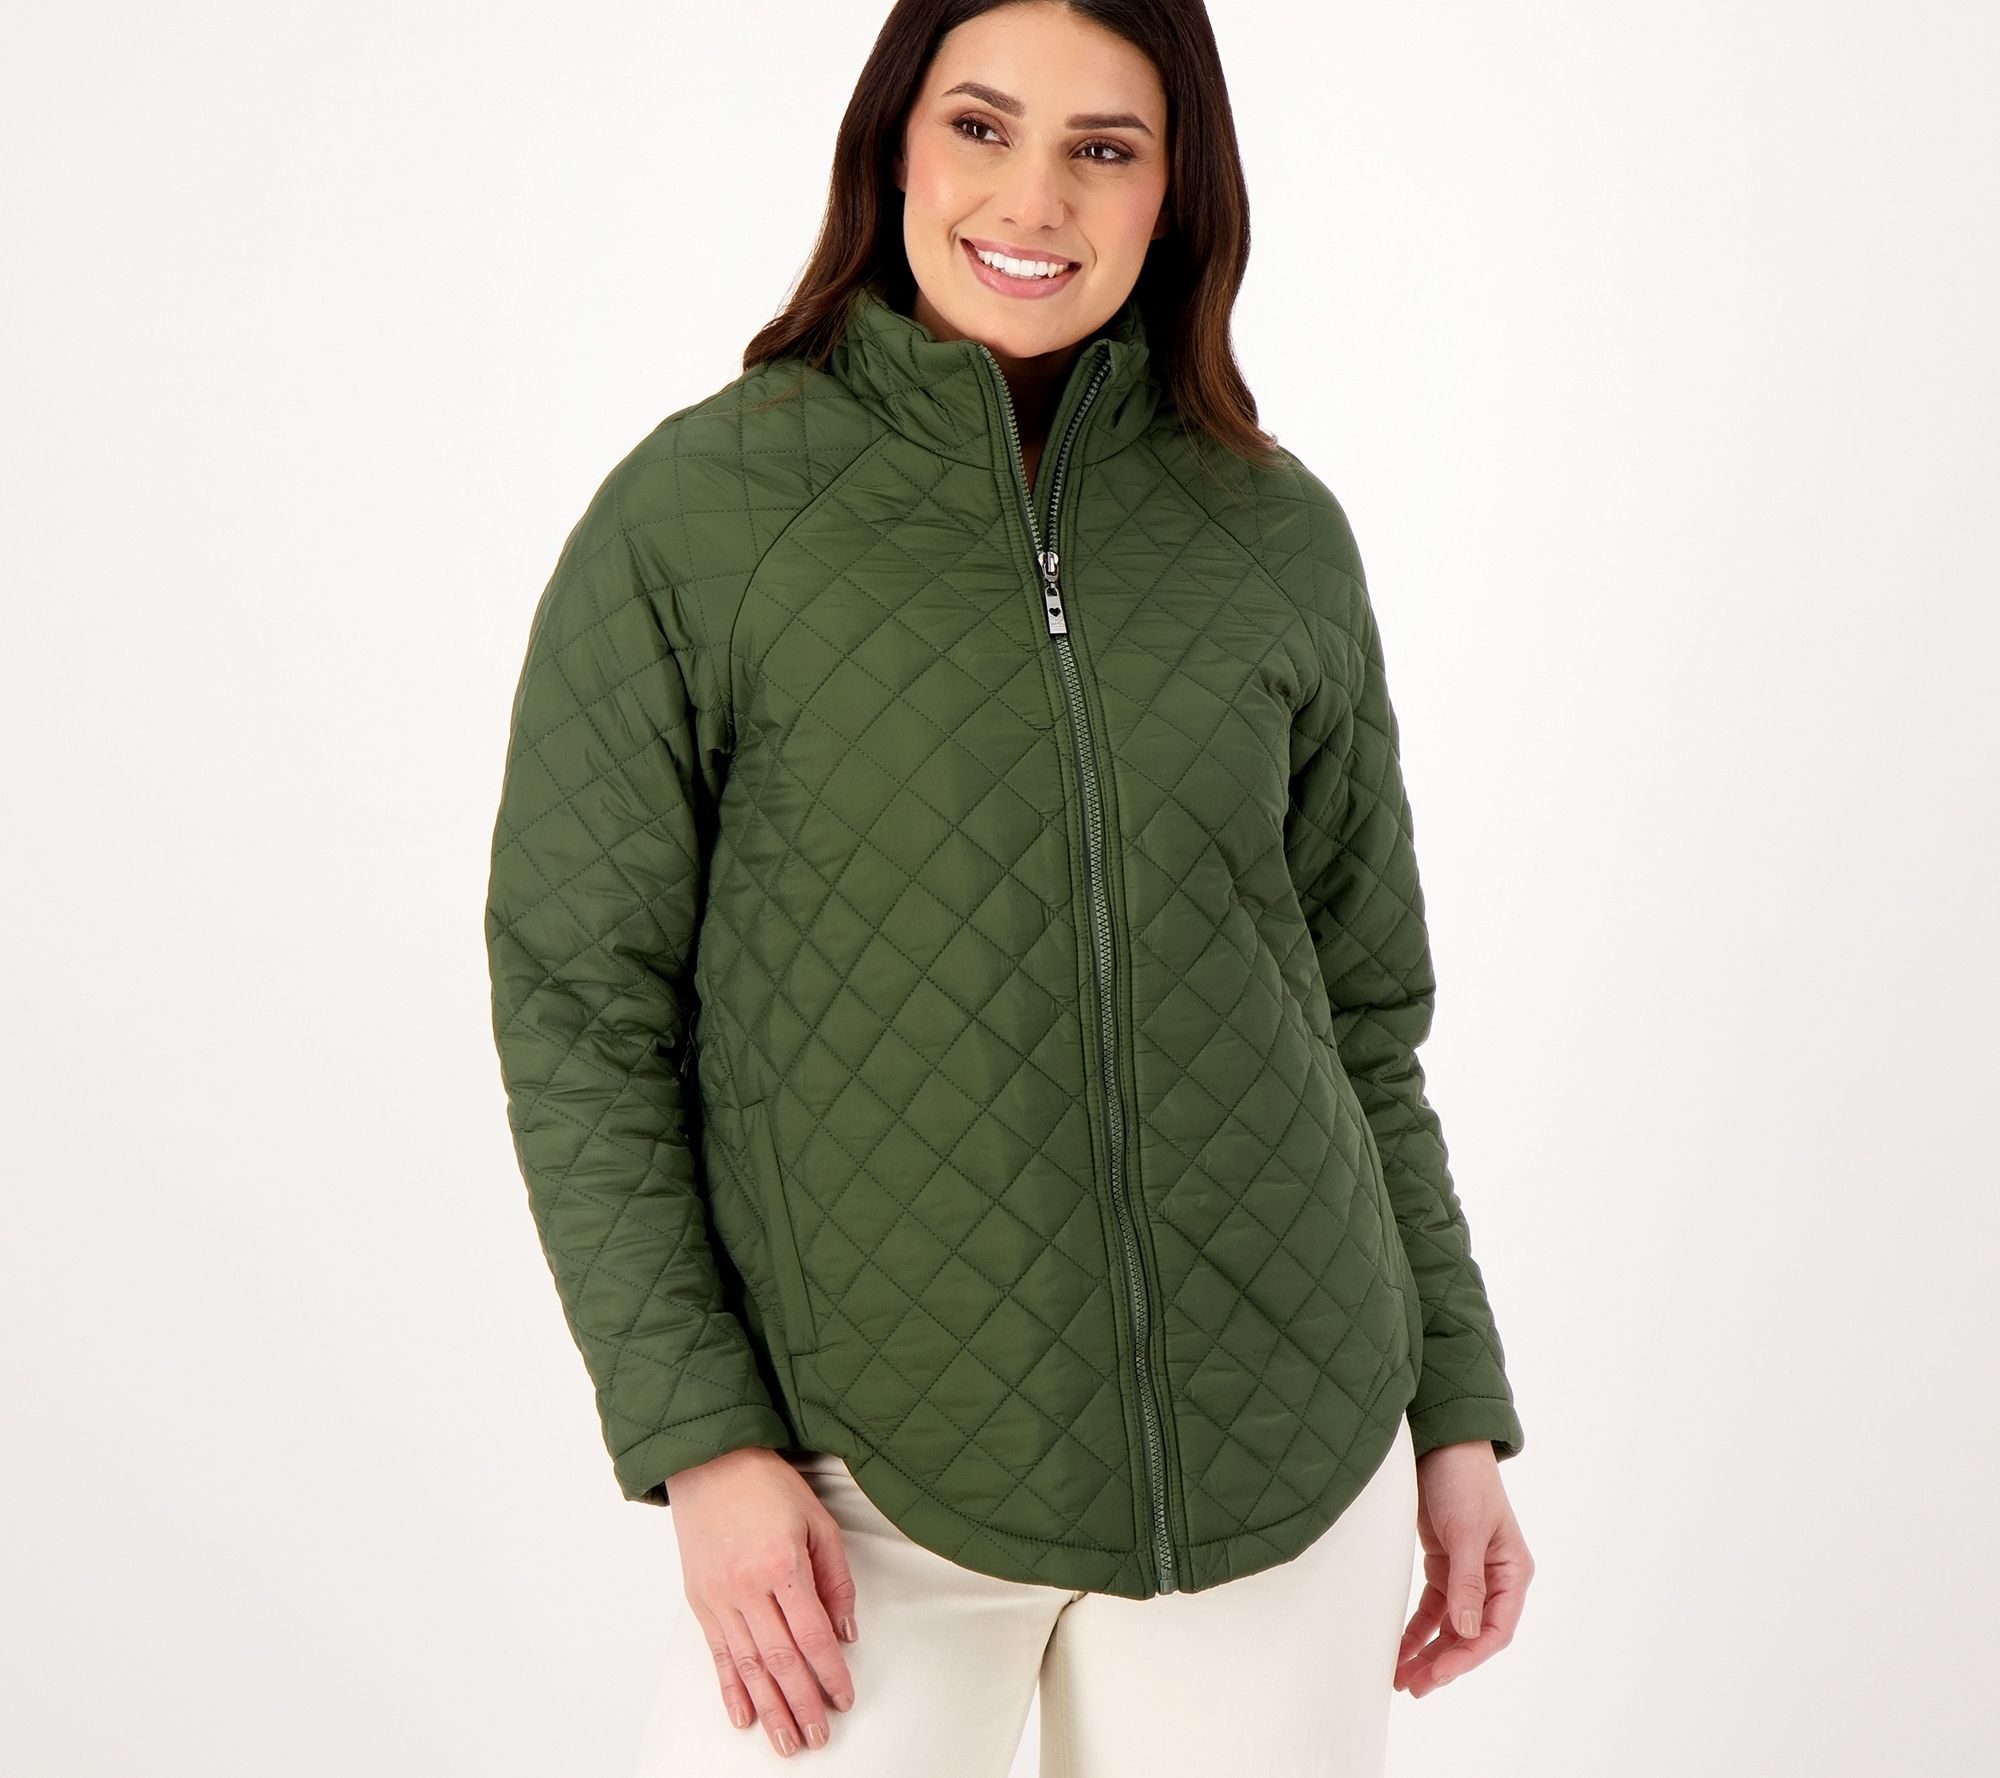 Women's Fusion Mid-Layer Jacket